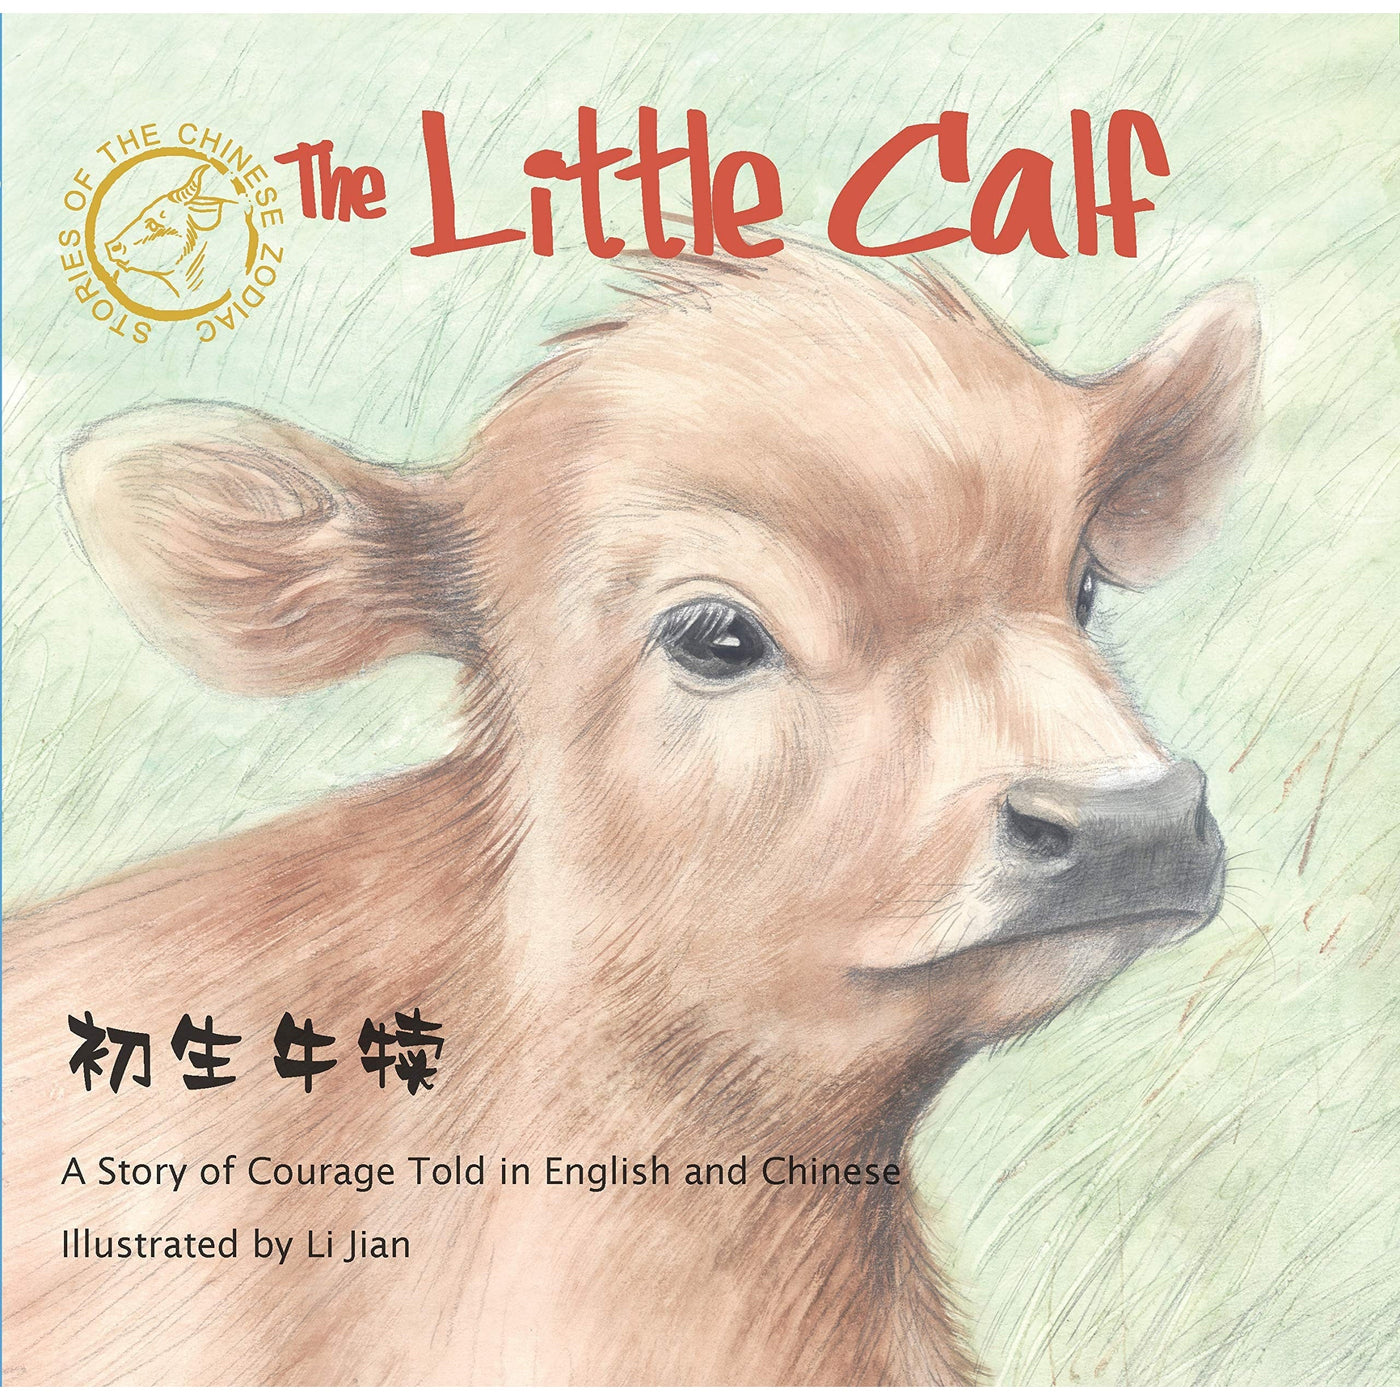 The Little Calf: A Story of Courage Told in English and Chinese (Stories of the Chinese Zodiac)